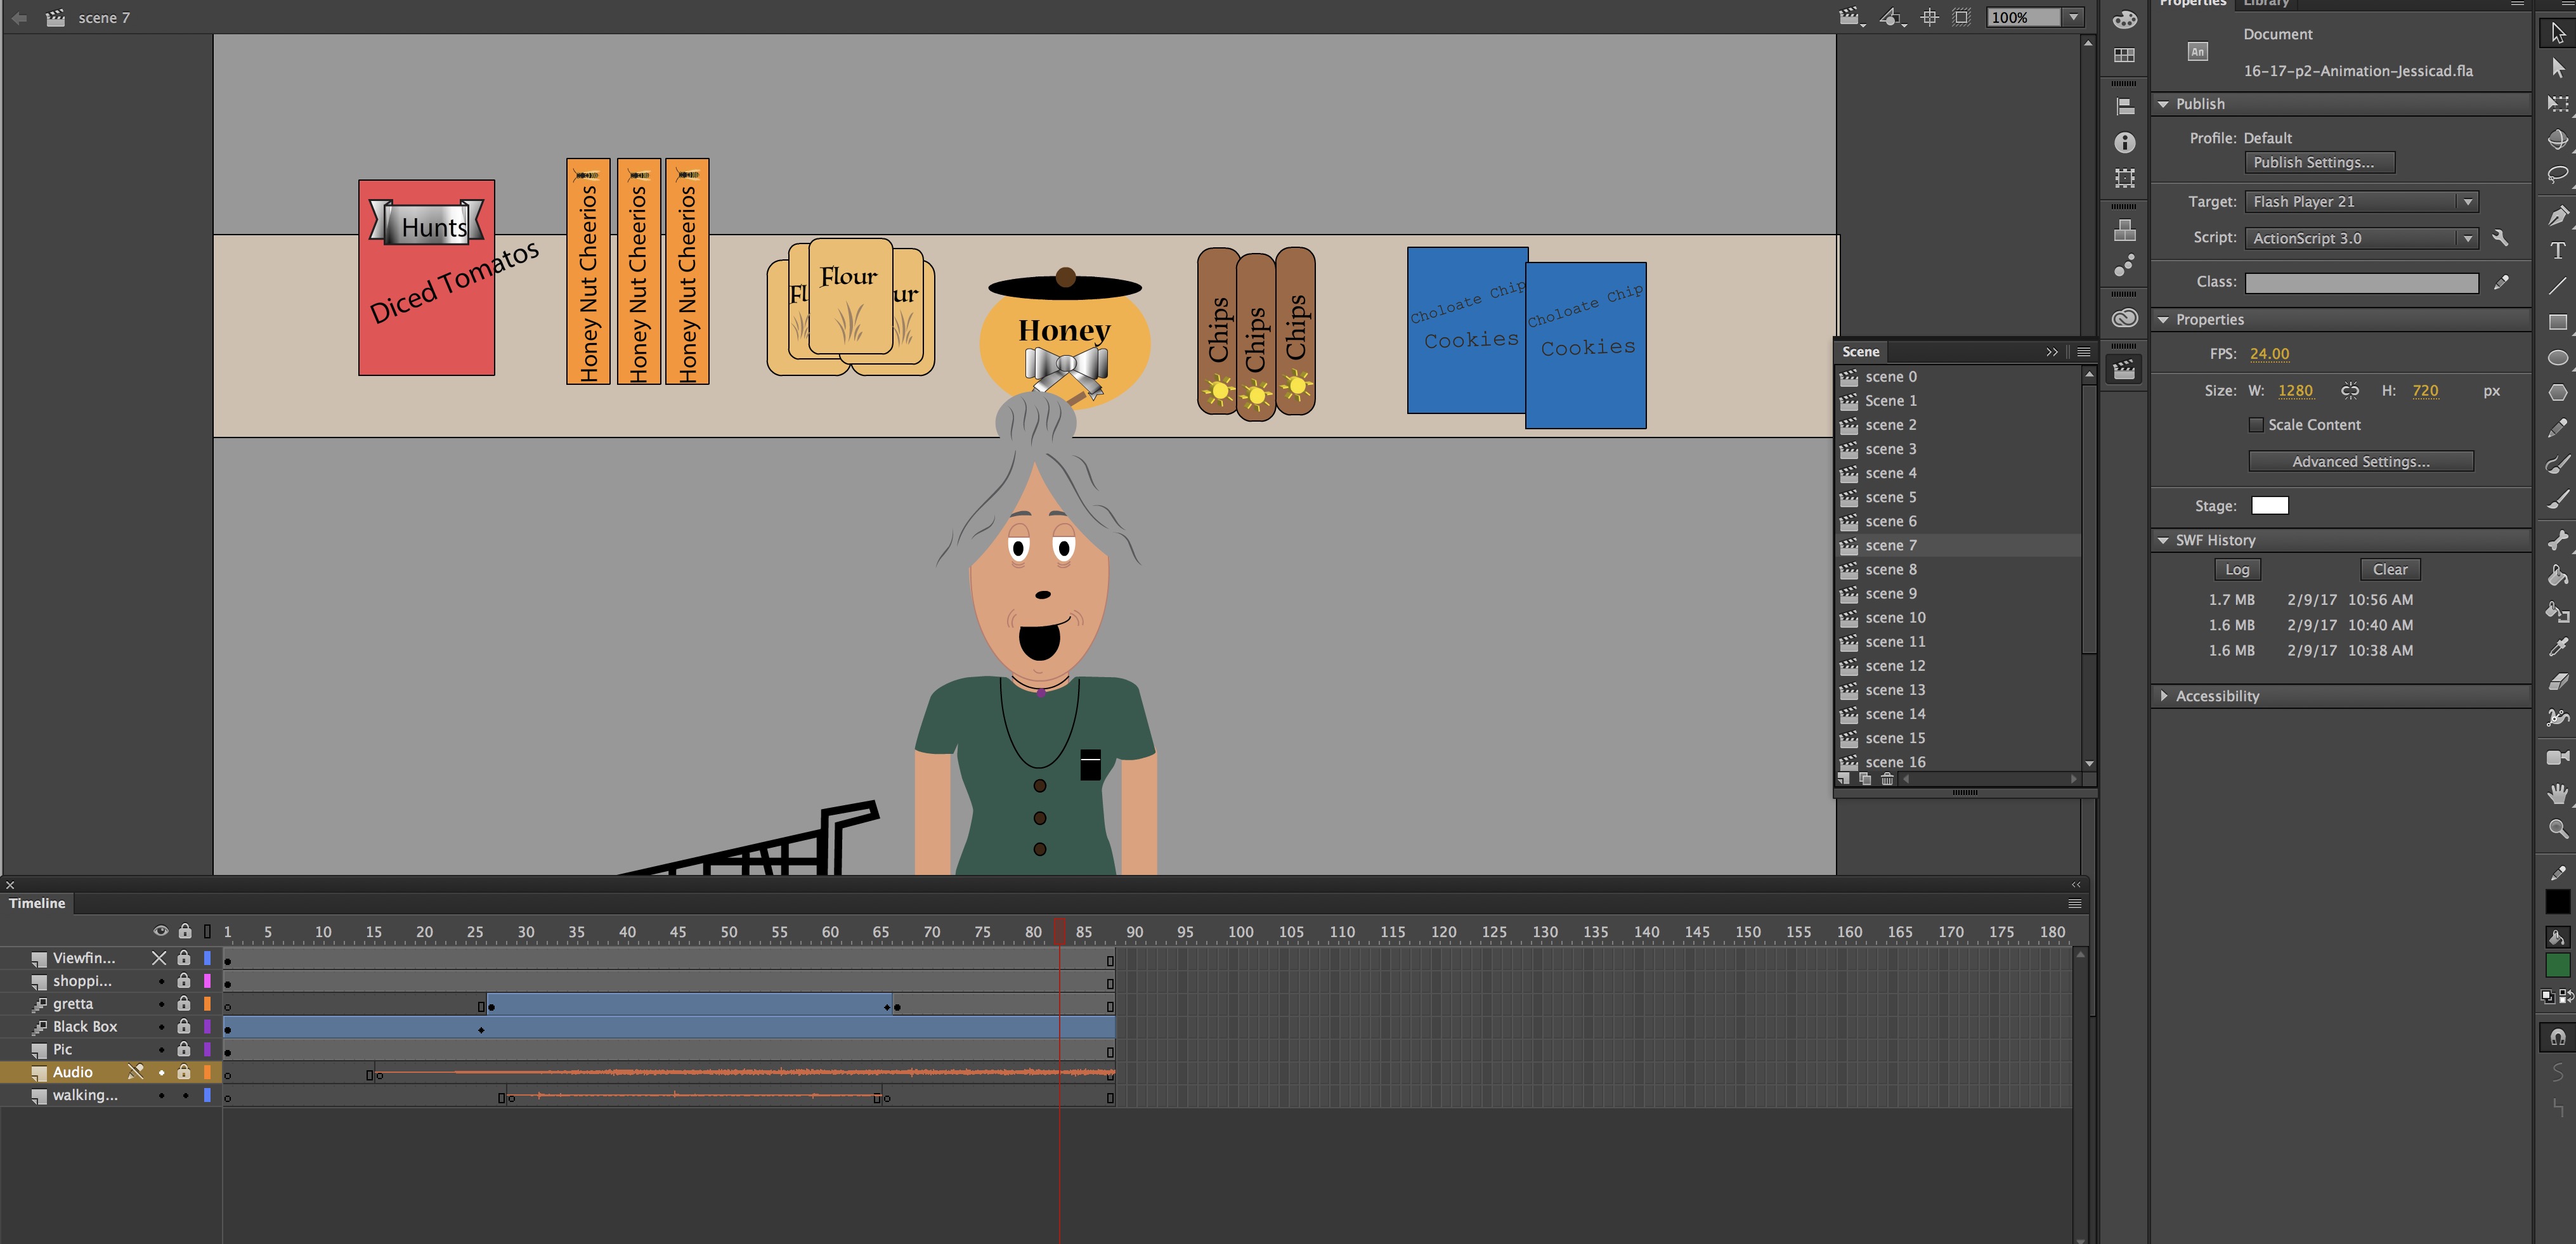 This is a screenshot of my animation in Animate.